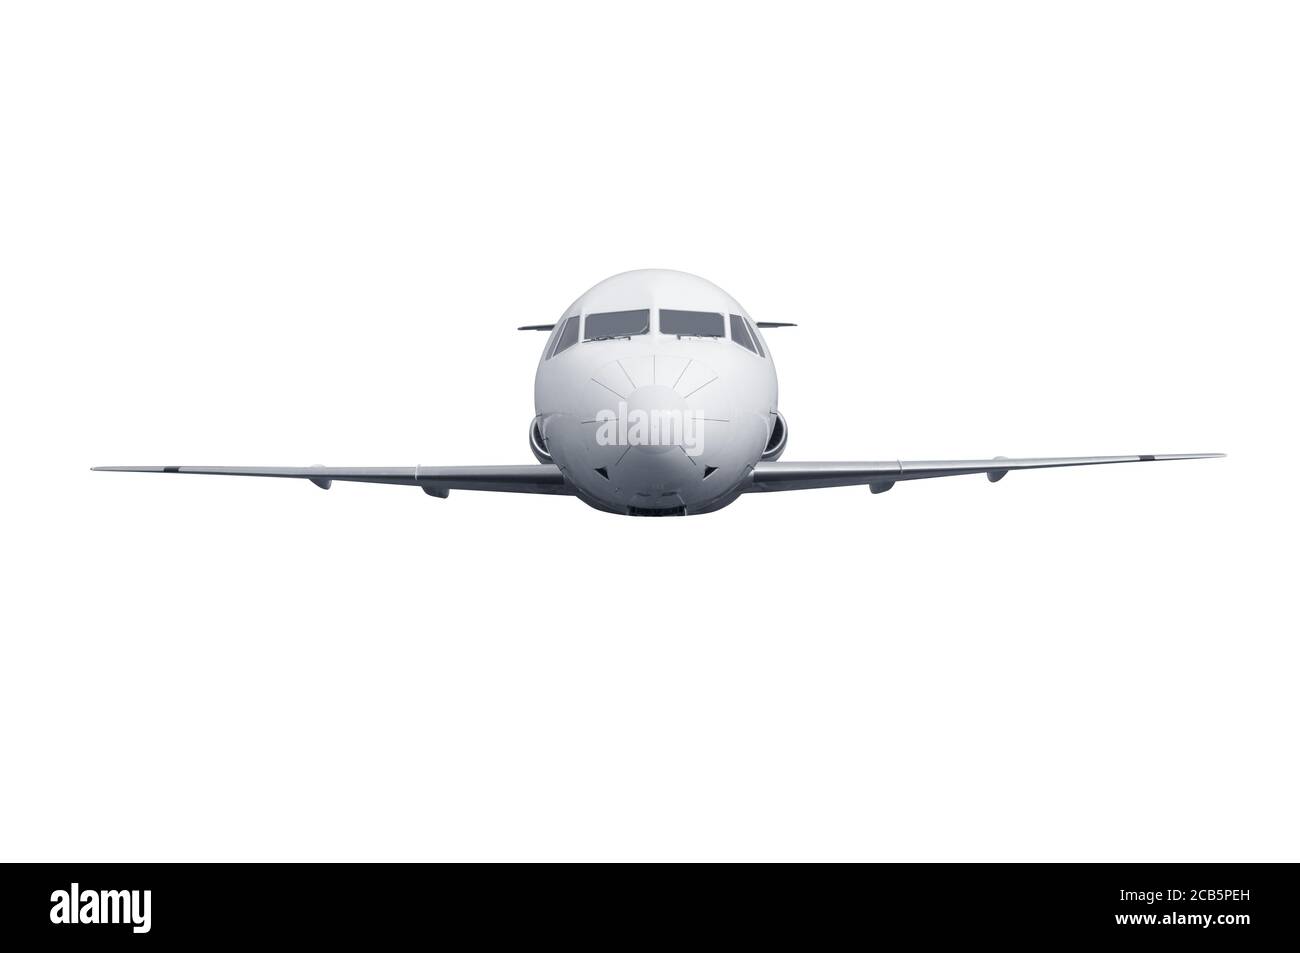 Airplane isolated over white background Stock Photo